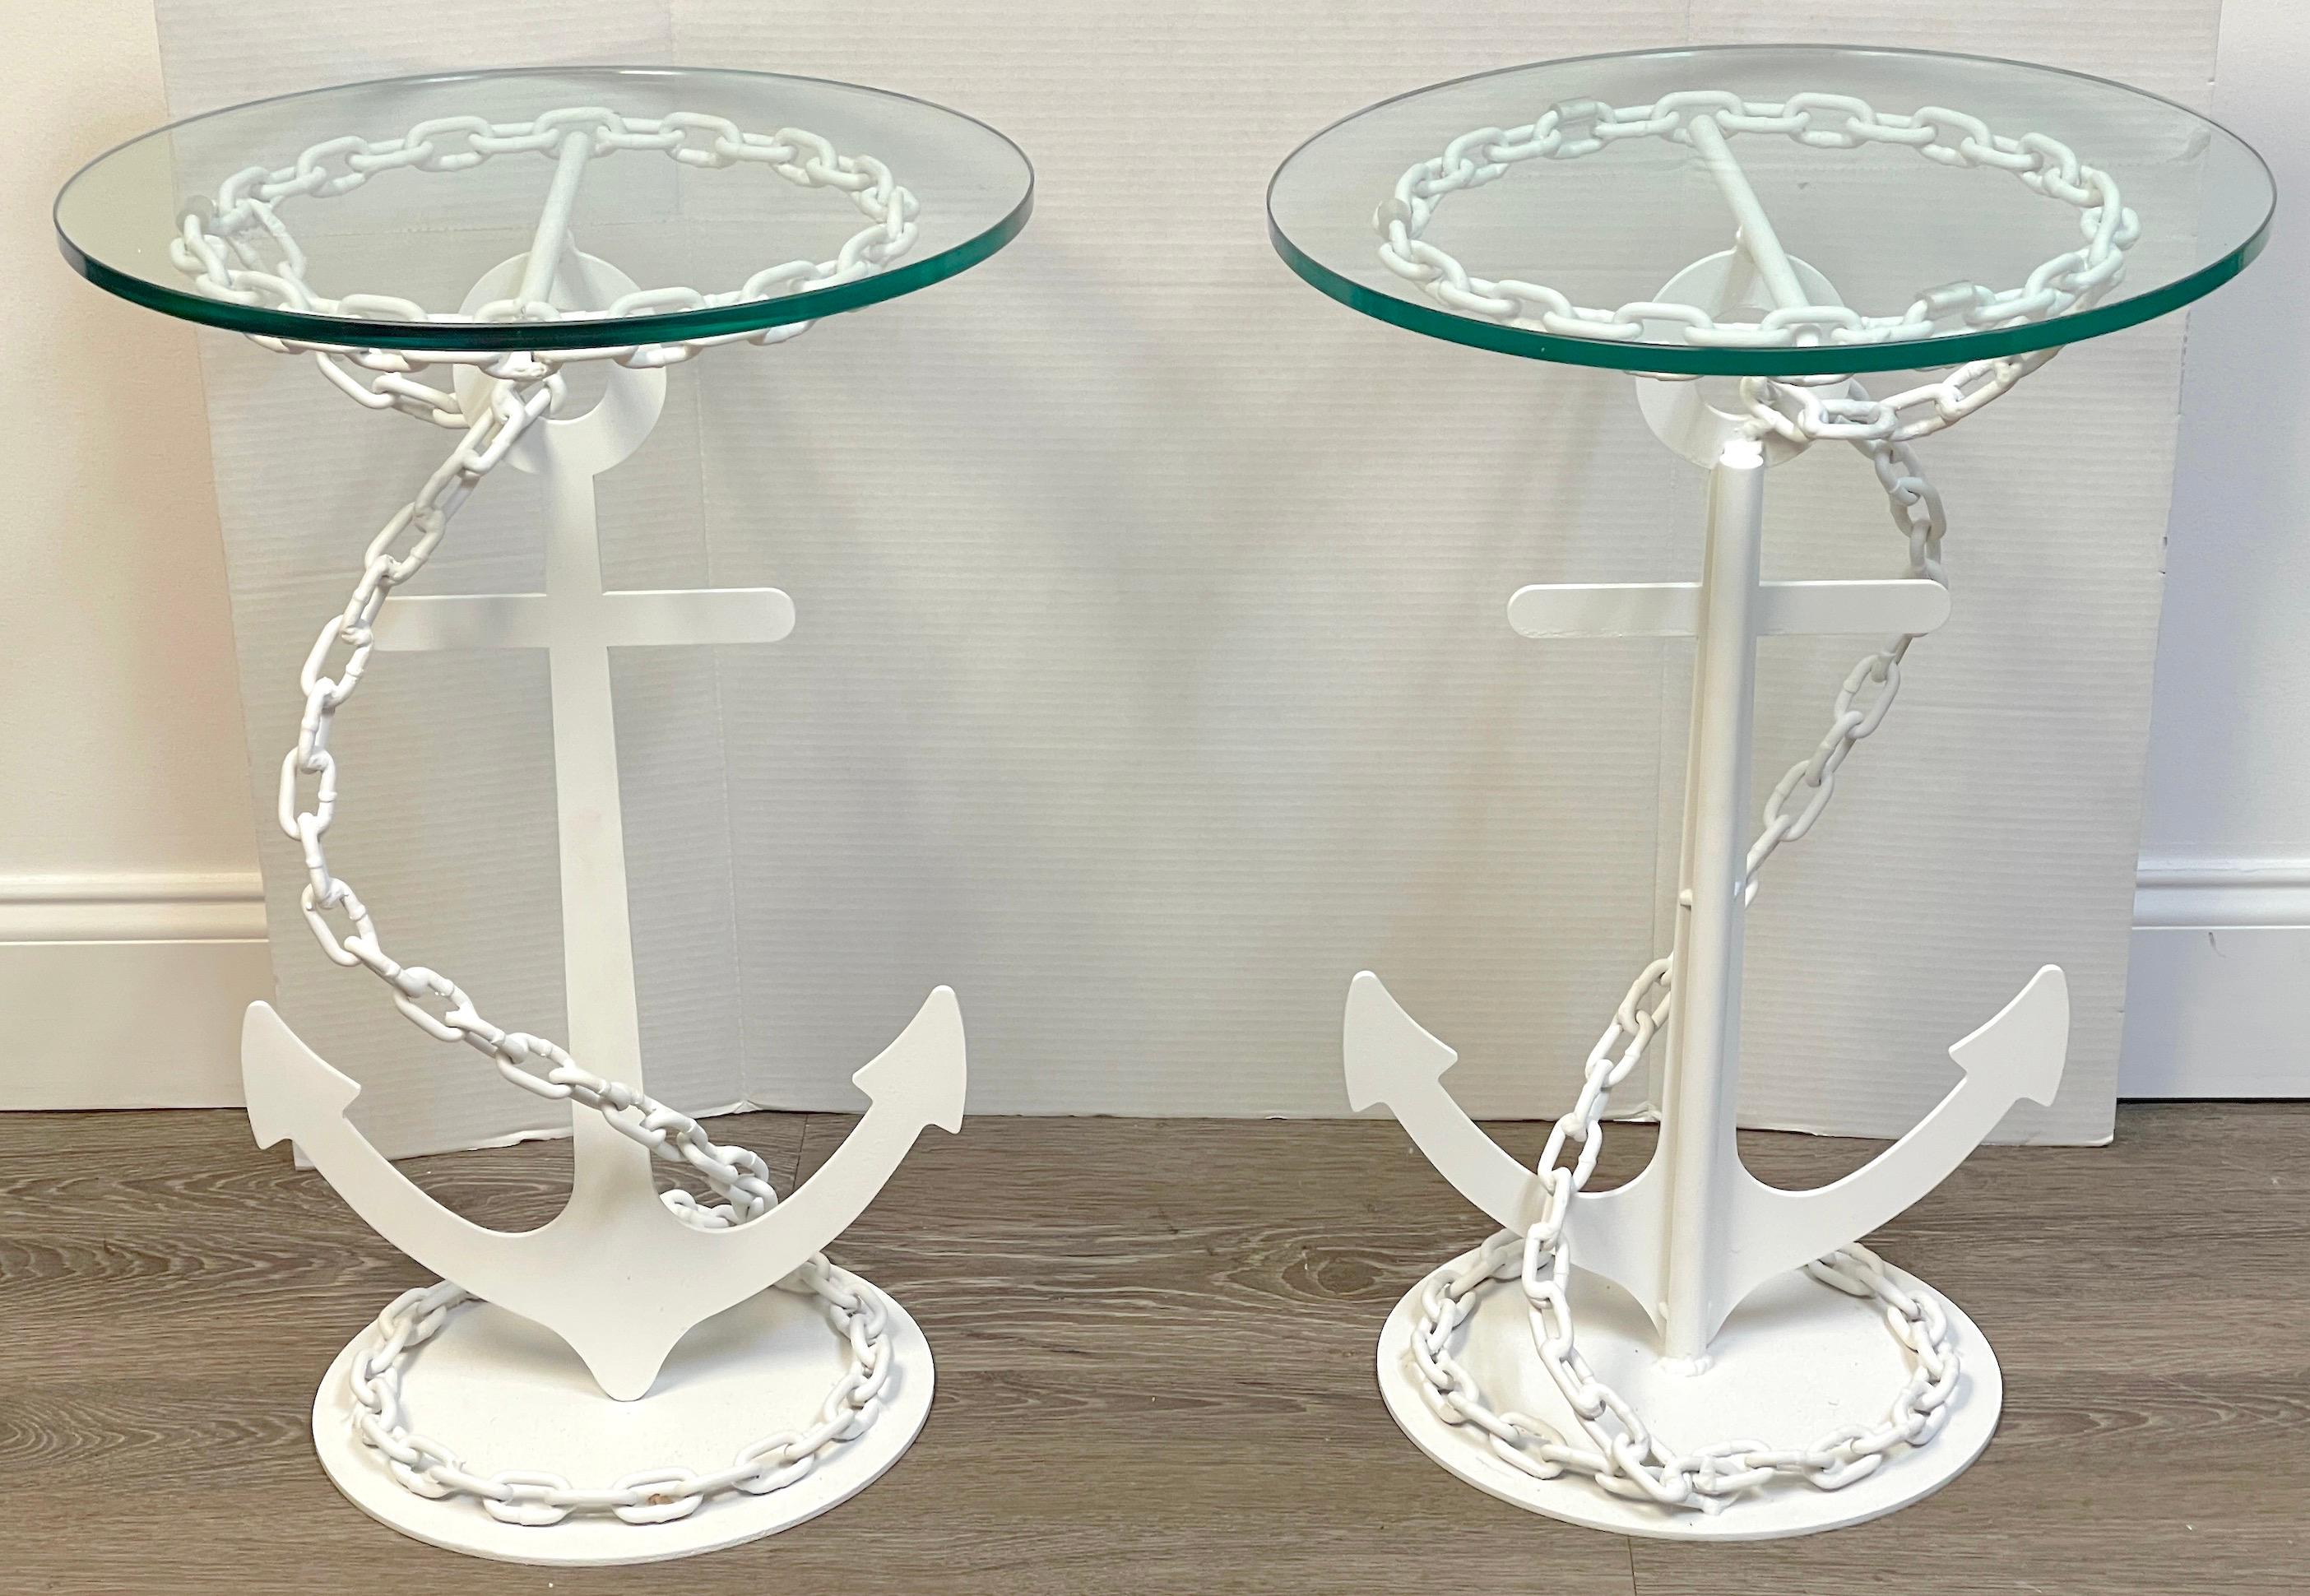 Pair of Post WWII modern wrought iron anchor & chain yacht side tables 
USA, Post WWII
Provenance: Palm Beach Estate

Each modern wrought iron anchor & chain yacht table is a visual optical sculpture, functional with a nod to whimsy. 
These